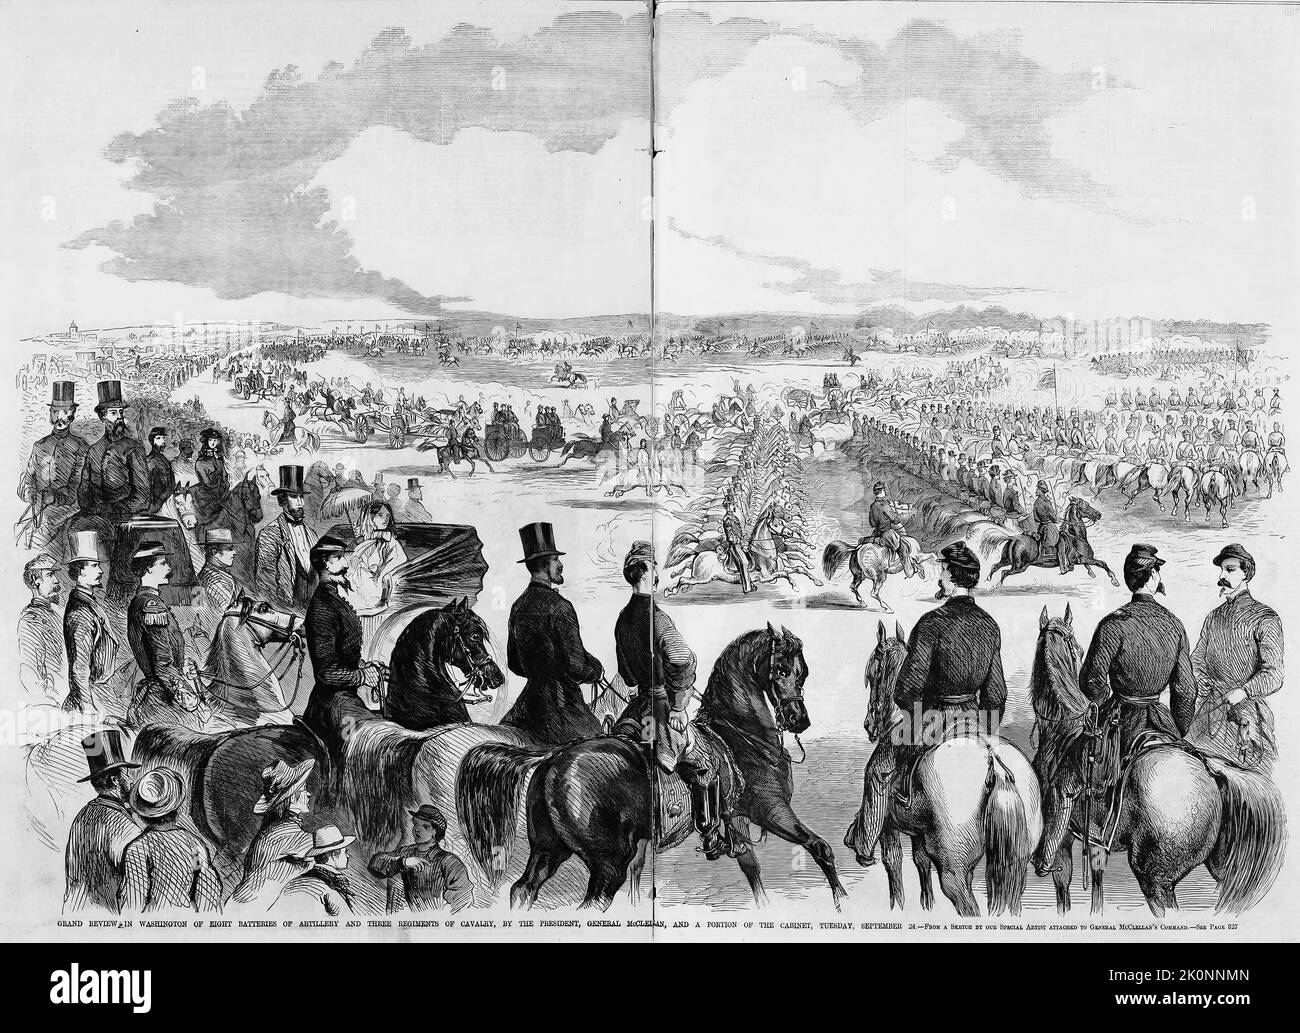 Grand Review in Washington of eight batteries of artillery and three regiments of cavalry, by President Abraham Lincoln, General George Brinton McClellan, and a portion of the Cabinet, September 24th, 1861. 19th century American Civil War illustration from Frank Leslie's Illustrated Newspaper Stock Photo